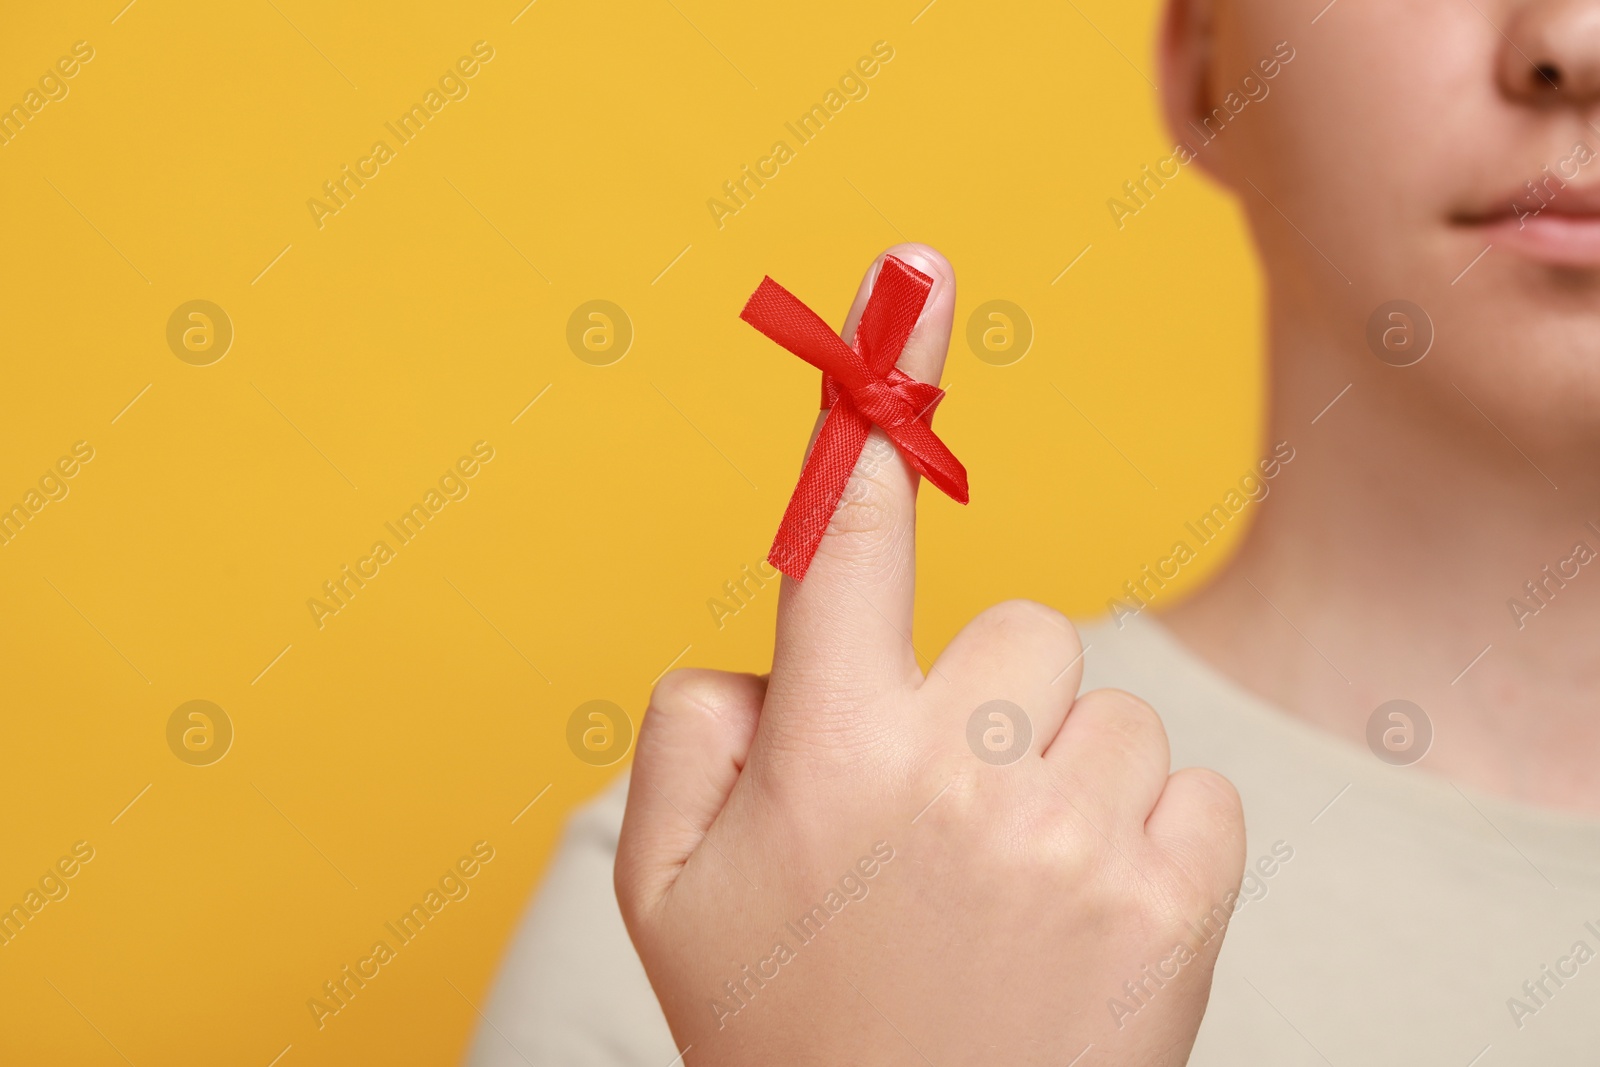 Photo of Man showing index finger with red tied bow as reminder against orange background, focus on hand. Space for text